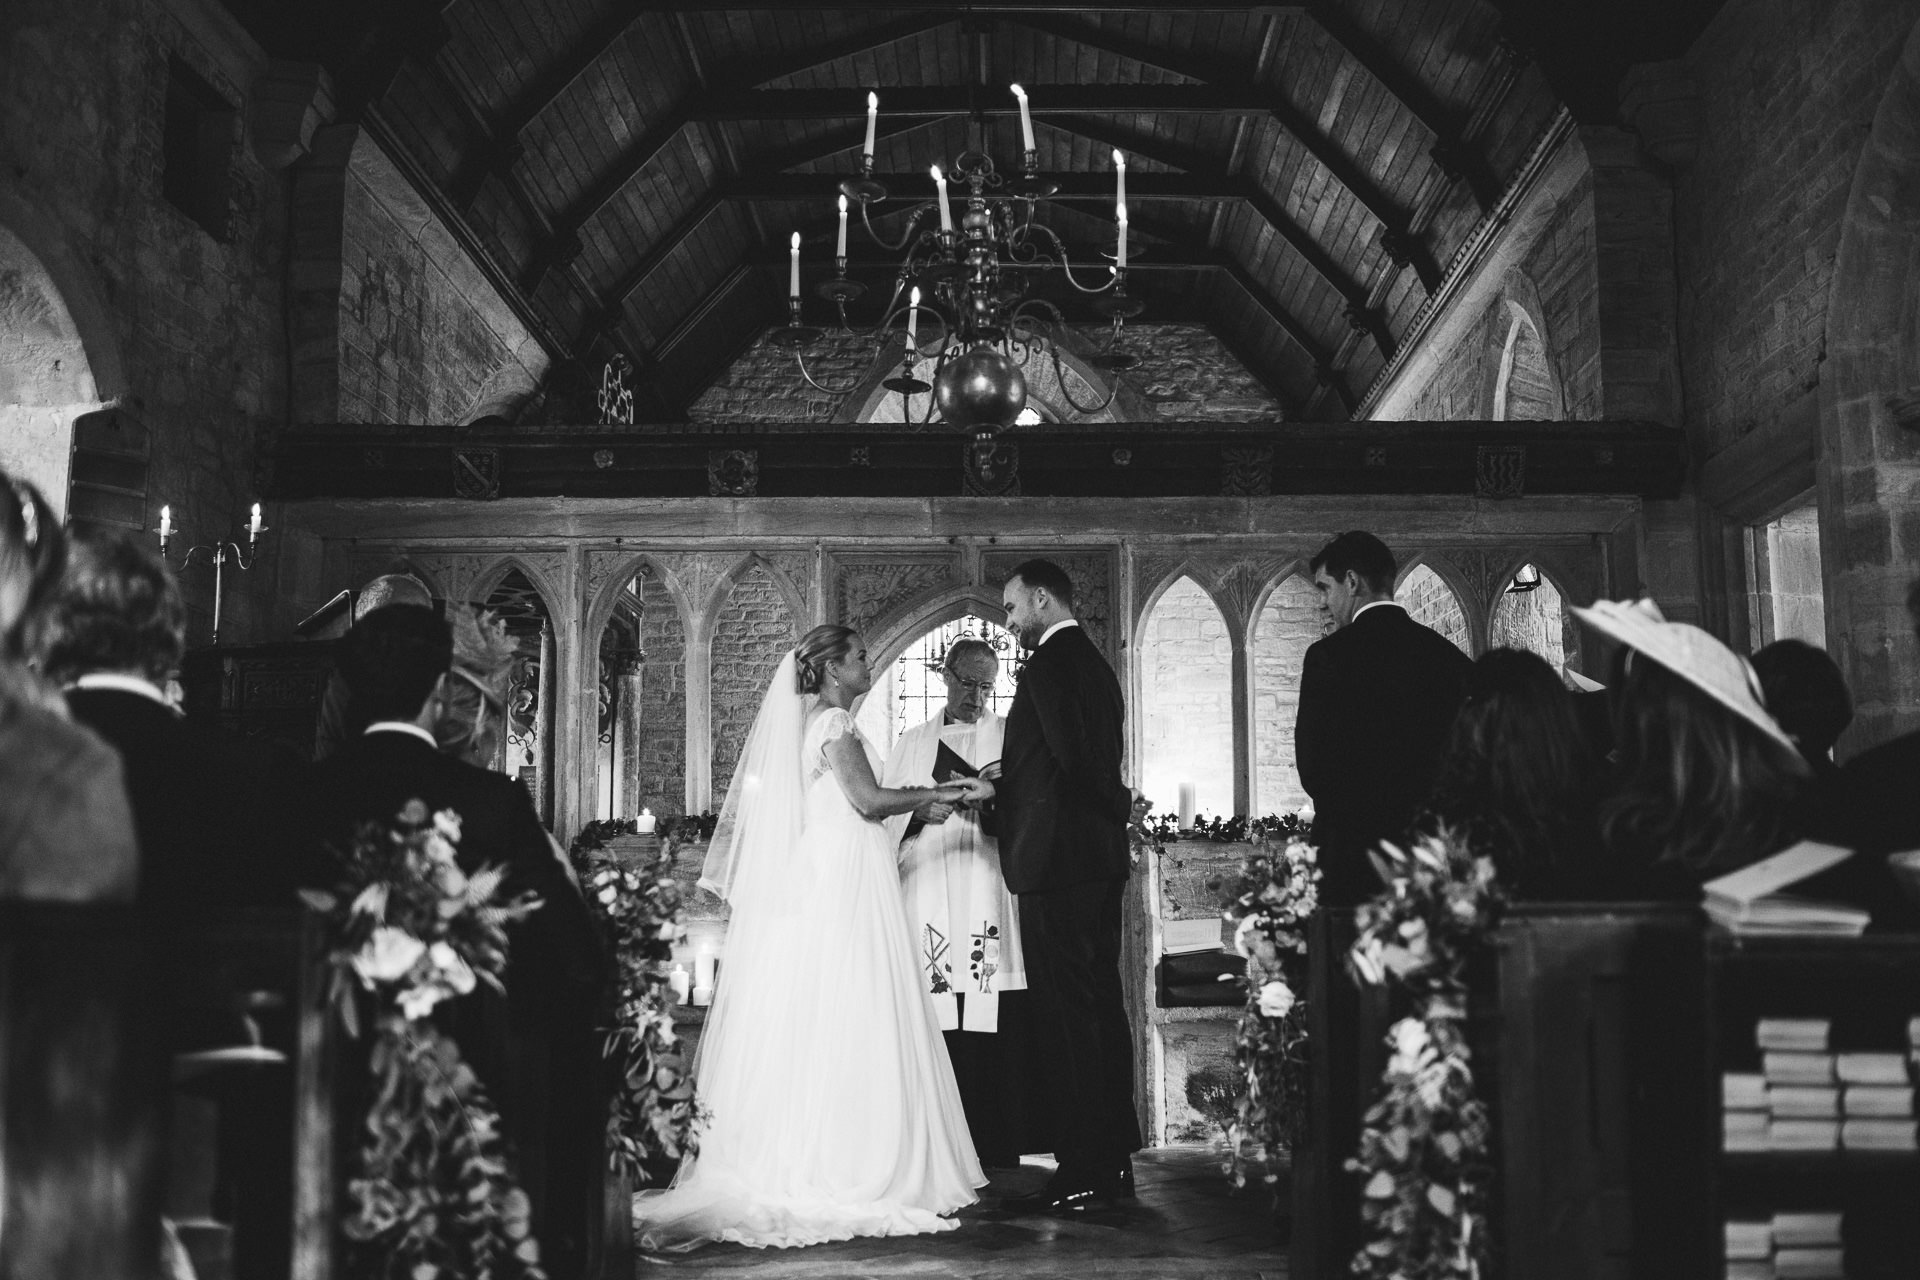 Bride and groom facing each other in the church